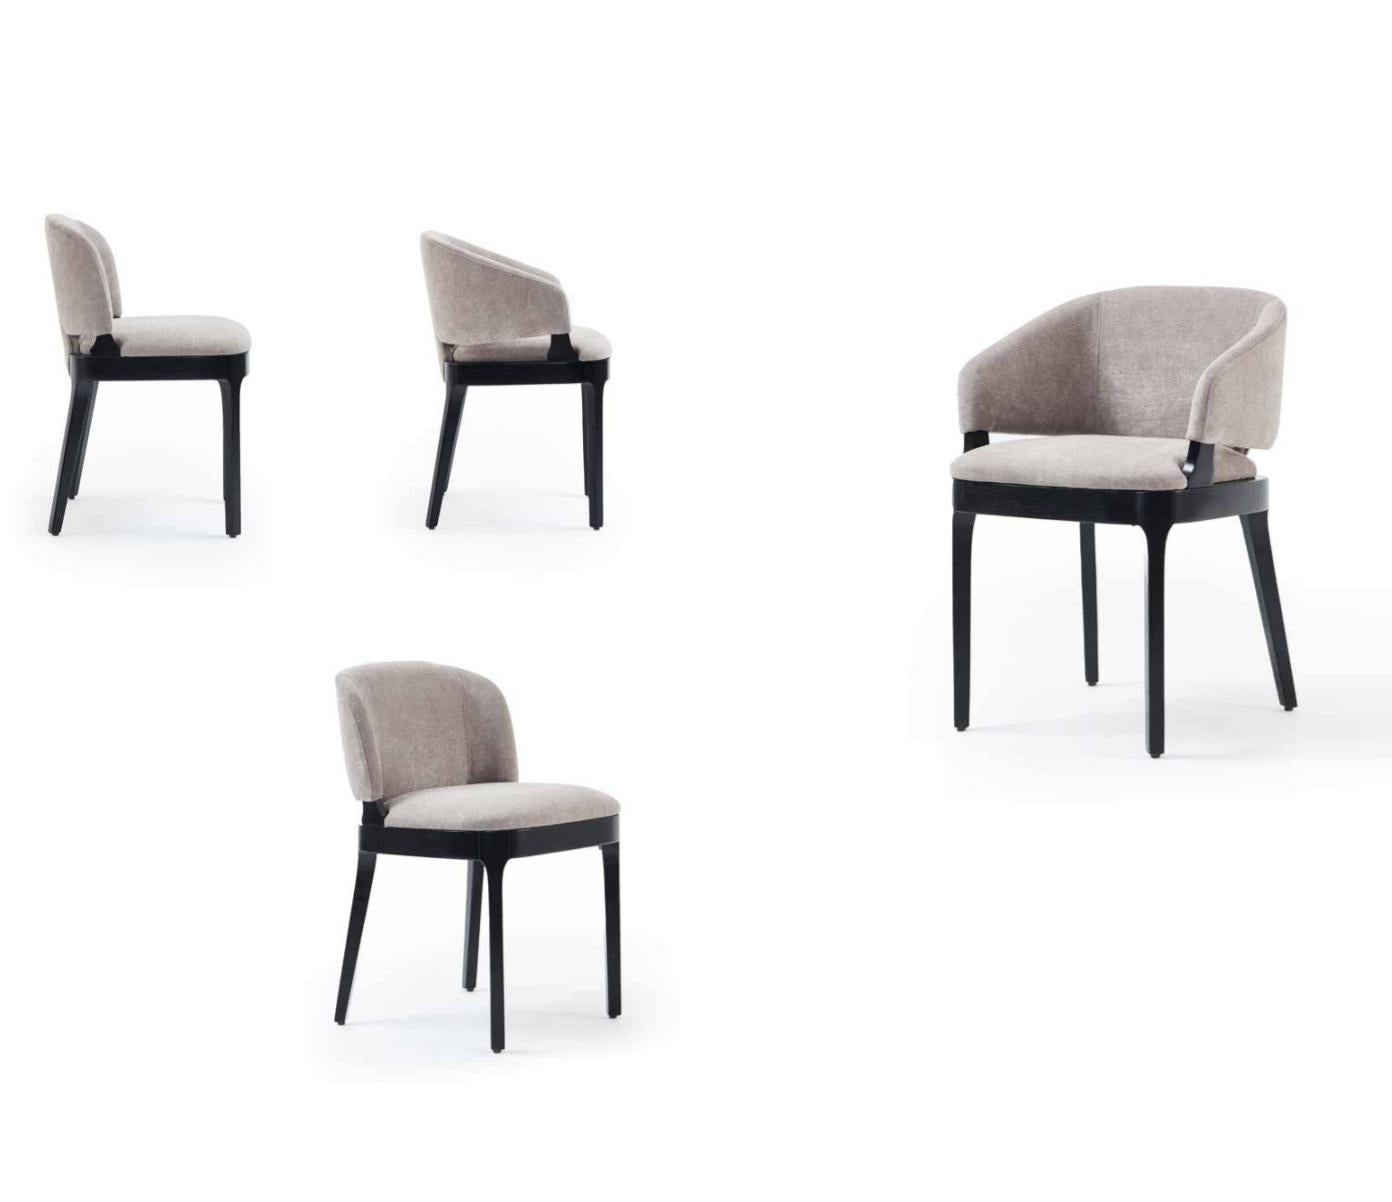 Modern Set of 8 Dining Chair With Arms Offered In COM For Sale